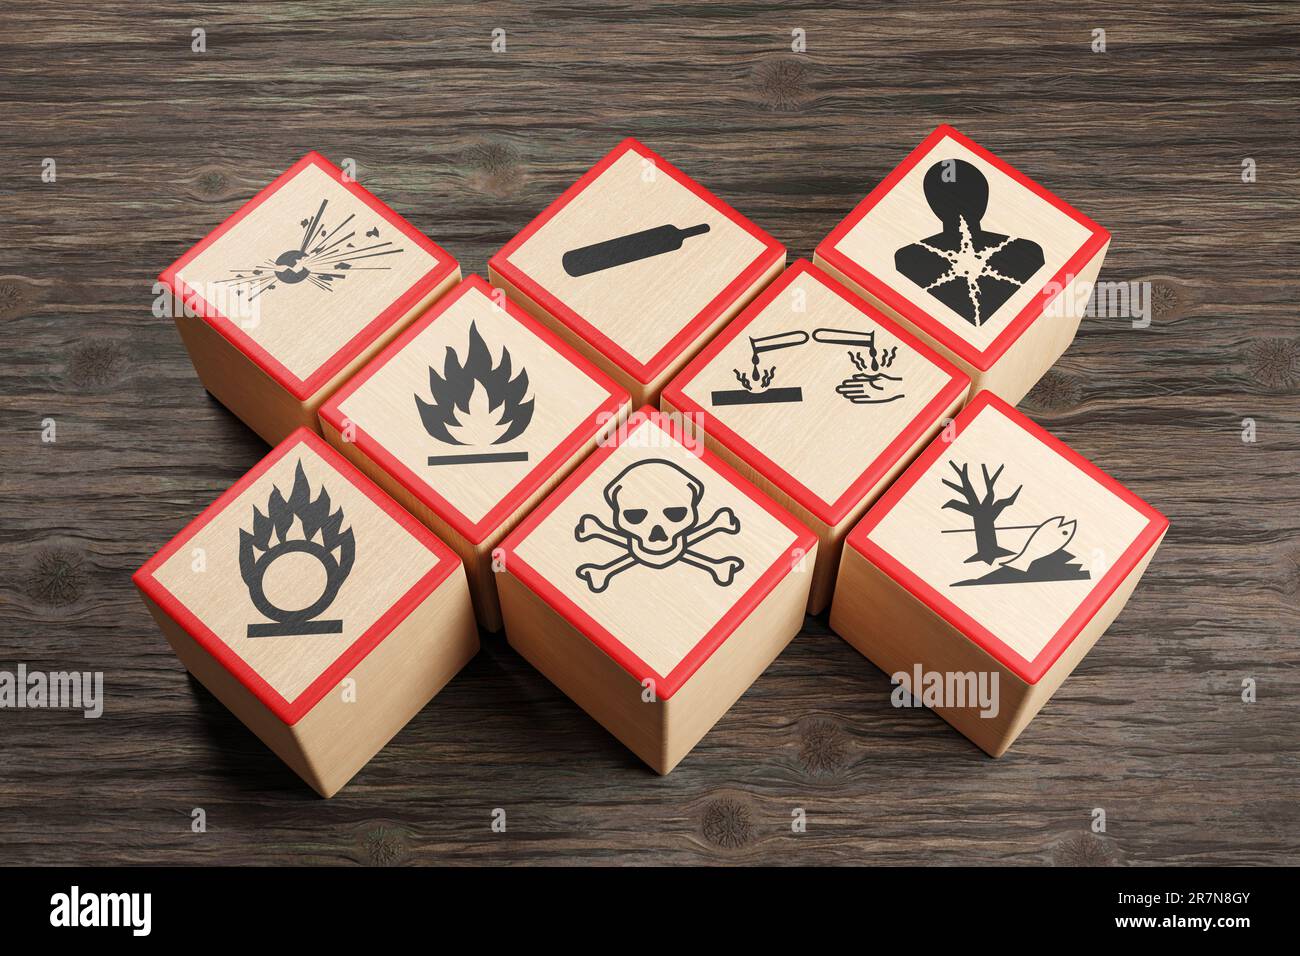 Wooden blocks showing different symbols of chemical hazard warnings on wood table. Concept of toxic substances and occupational health Stock Photo